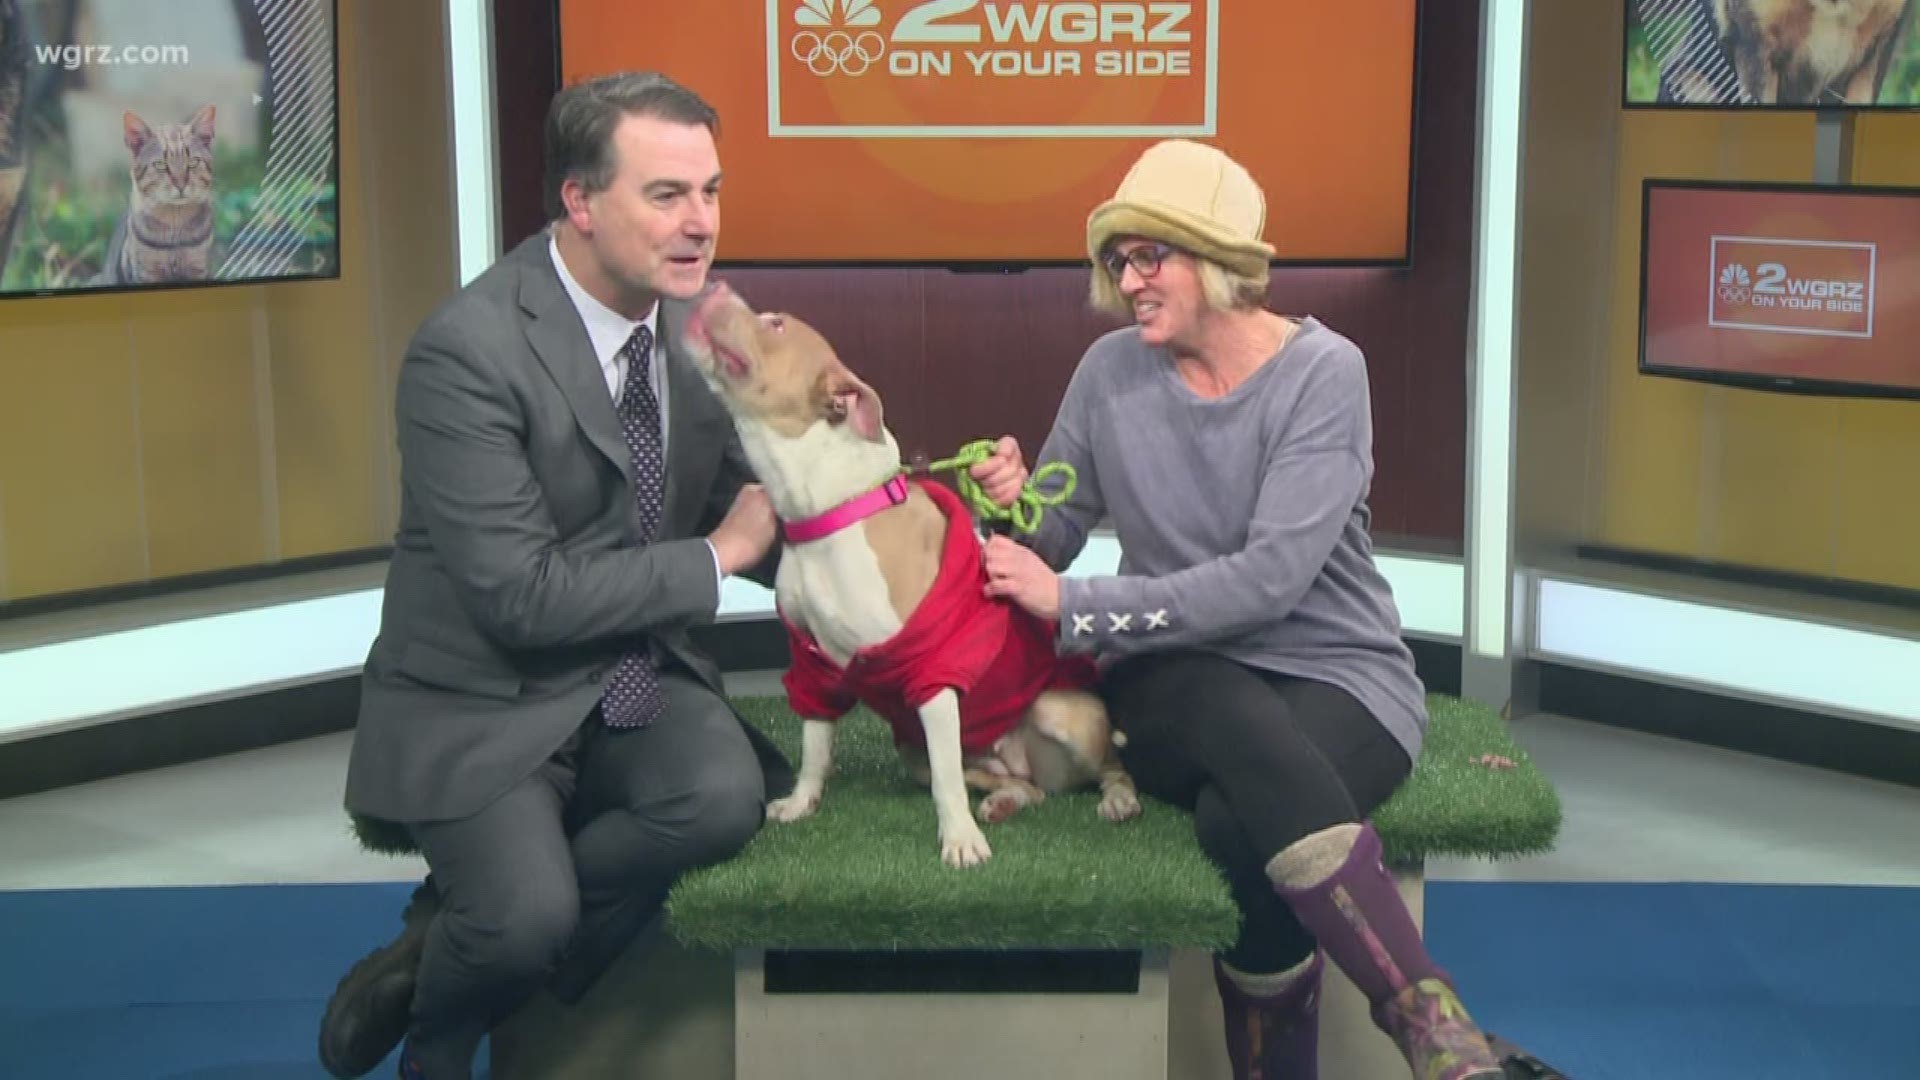 Eve is a fun-loving and energetic dog who needs a loving home. She's treat motivated and trainable. Contact the Buffalo Animal Shelter for more details.